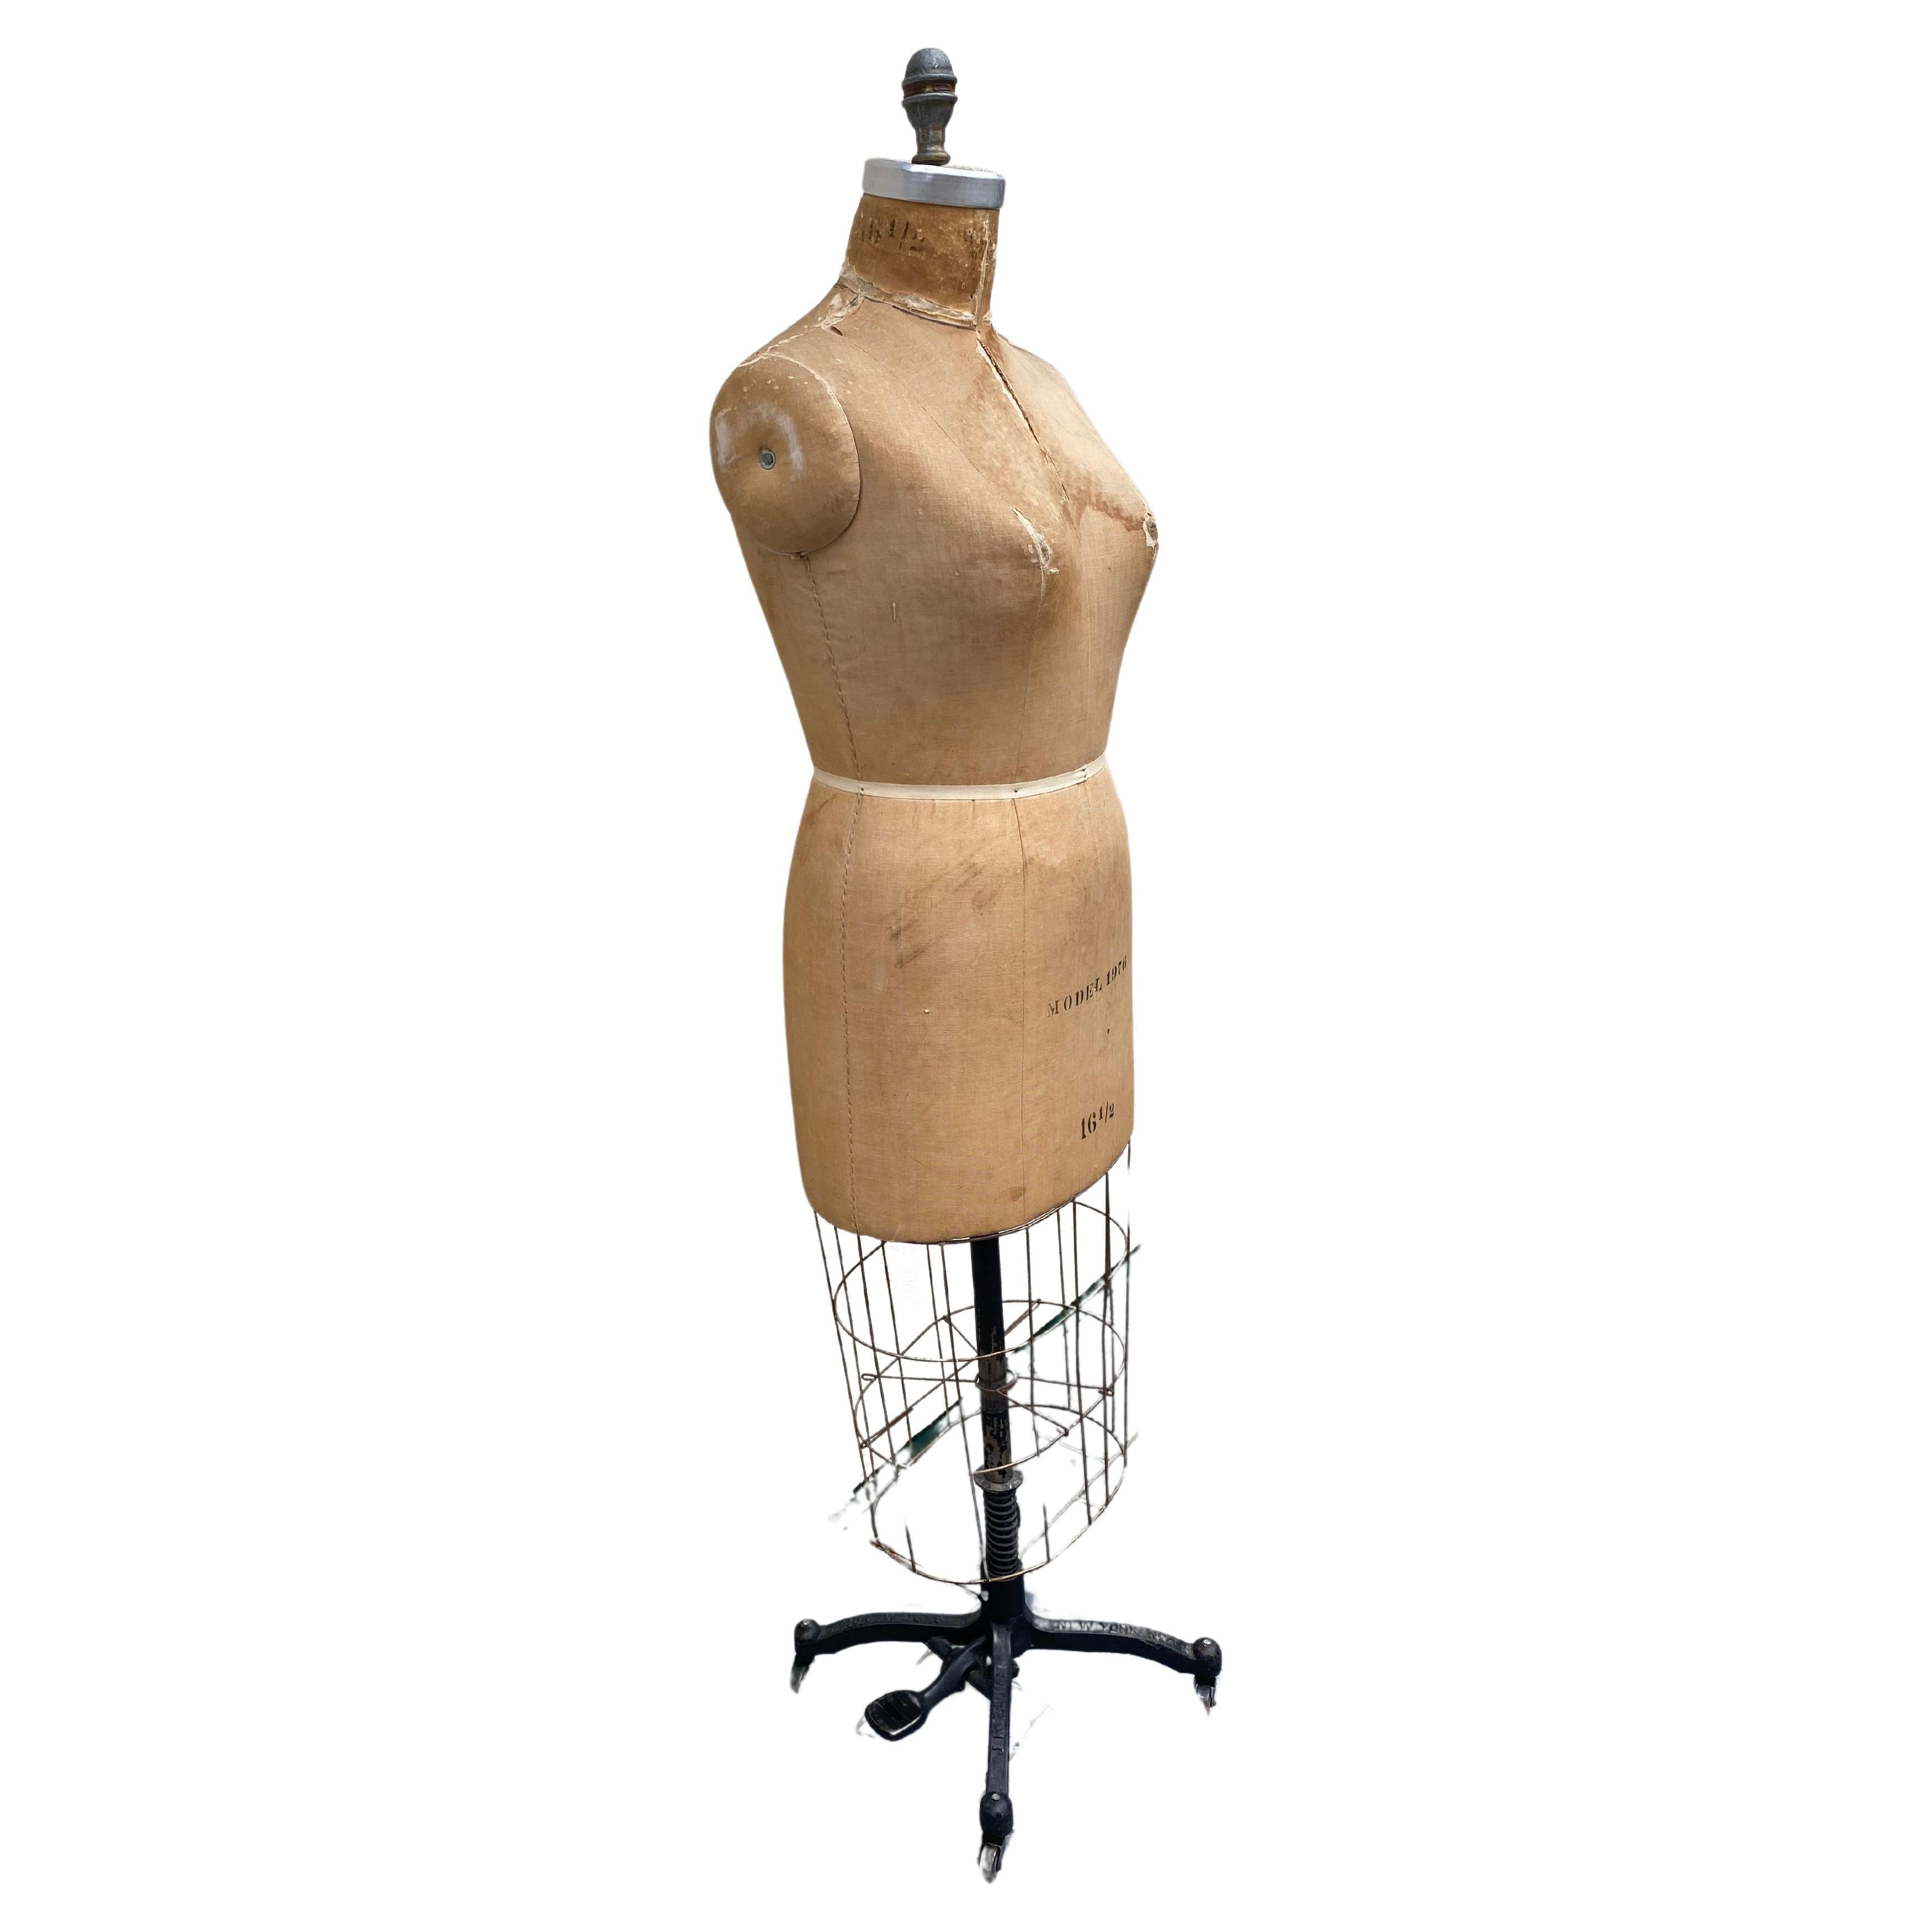 Vintage original J.R.Bauman 1976 dress form mannequin, New York.
Size 16.5 with signs of age appropriate wear on a cast iron base with casters. The form is wrapped in linen and layered with cotton batting over a papier-mâché base.  This is great